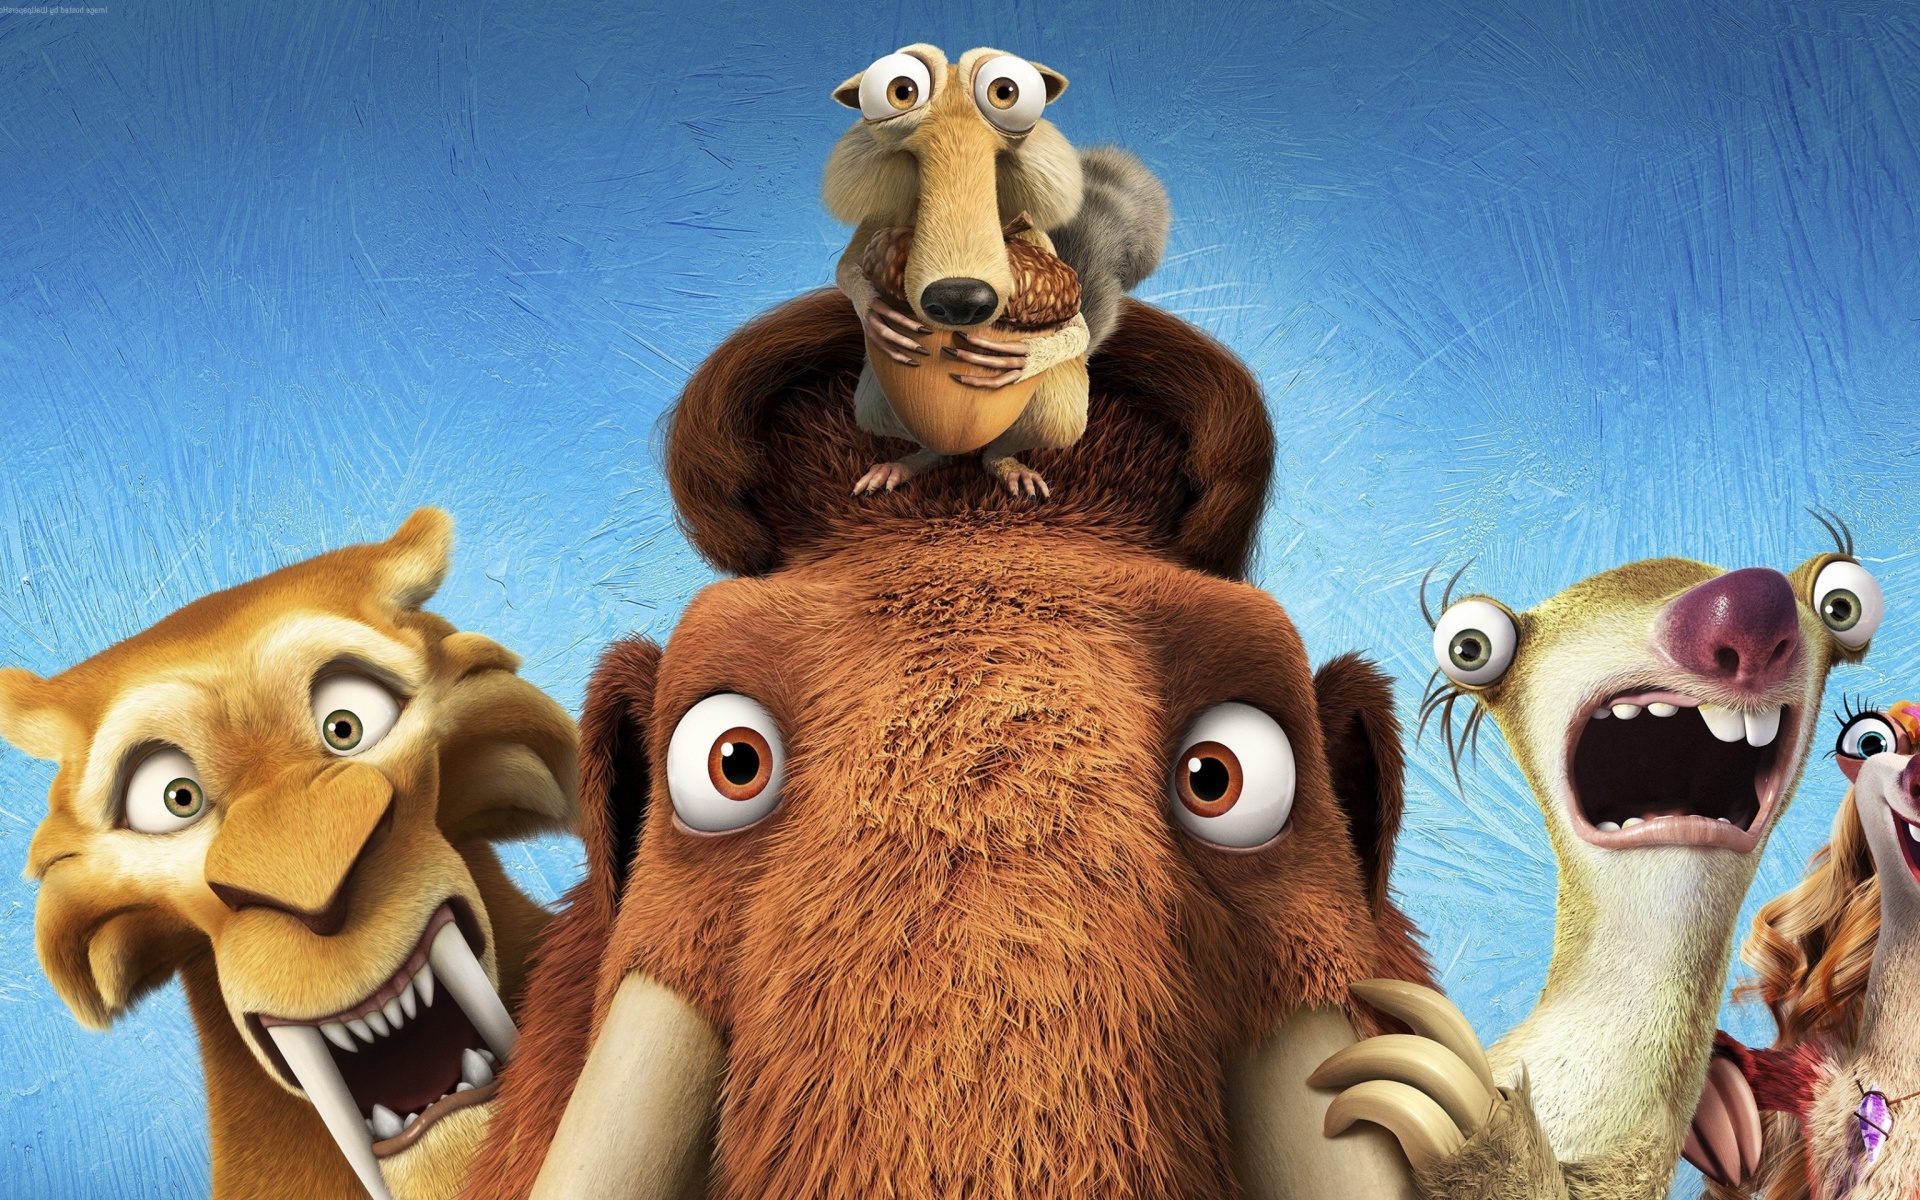 Ice Age 5 Collision Course with Diego, Manny, Scrat, Sid, Mammoths wallpaper 1920x1200